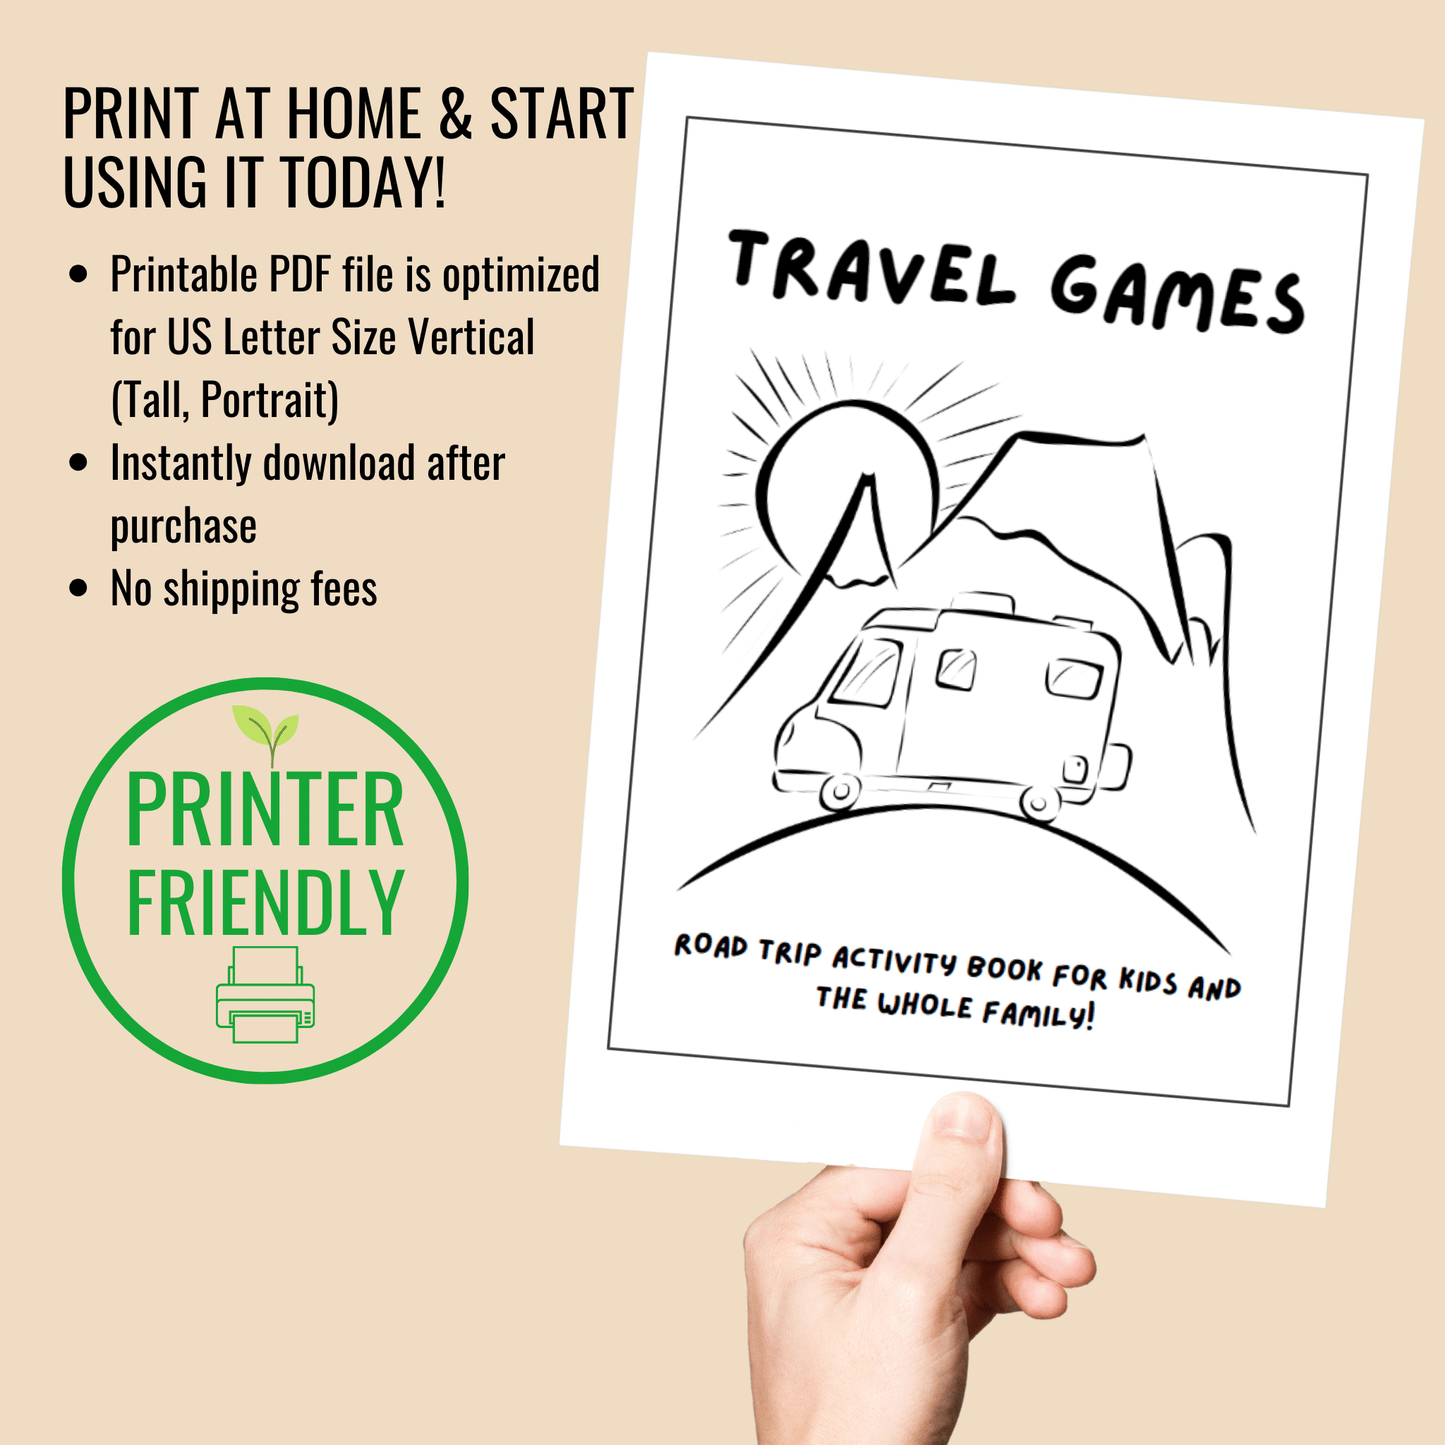 Printable Travel Games for Kids (Road Trip Activity Book) - Camper FAQs